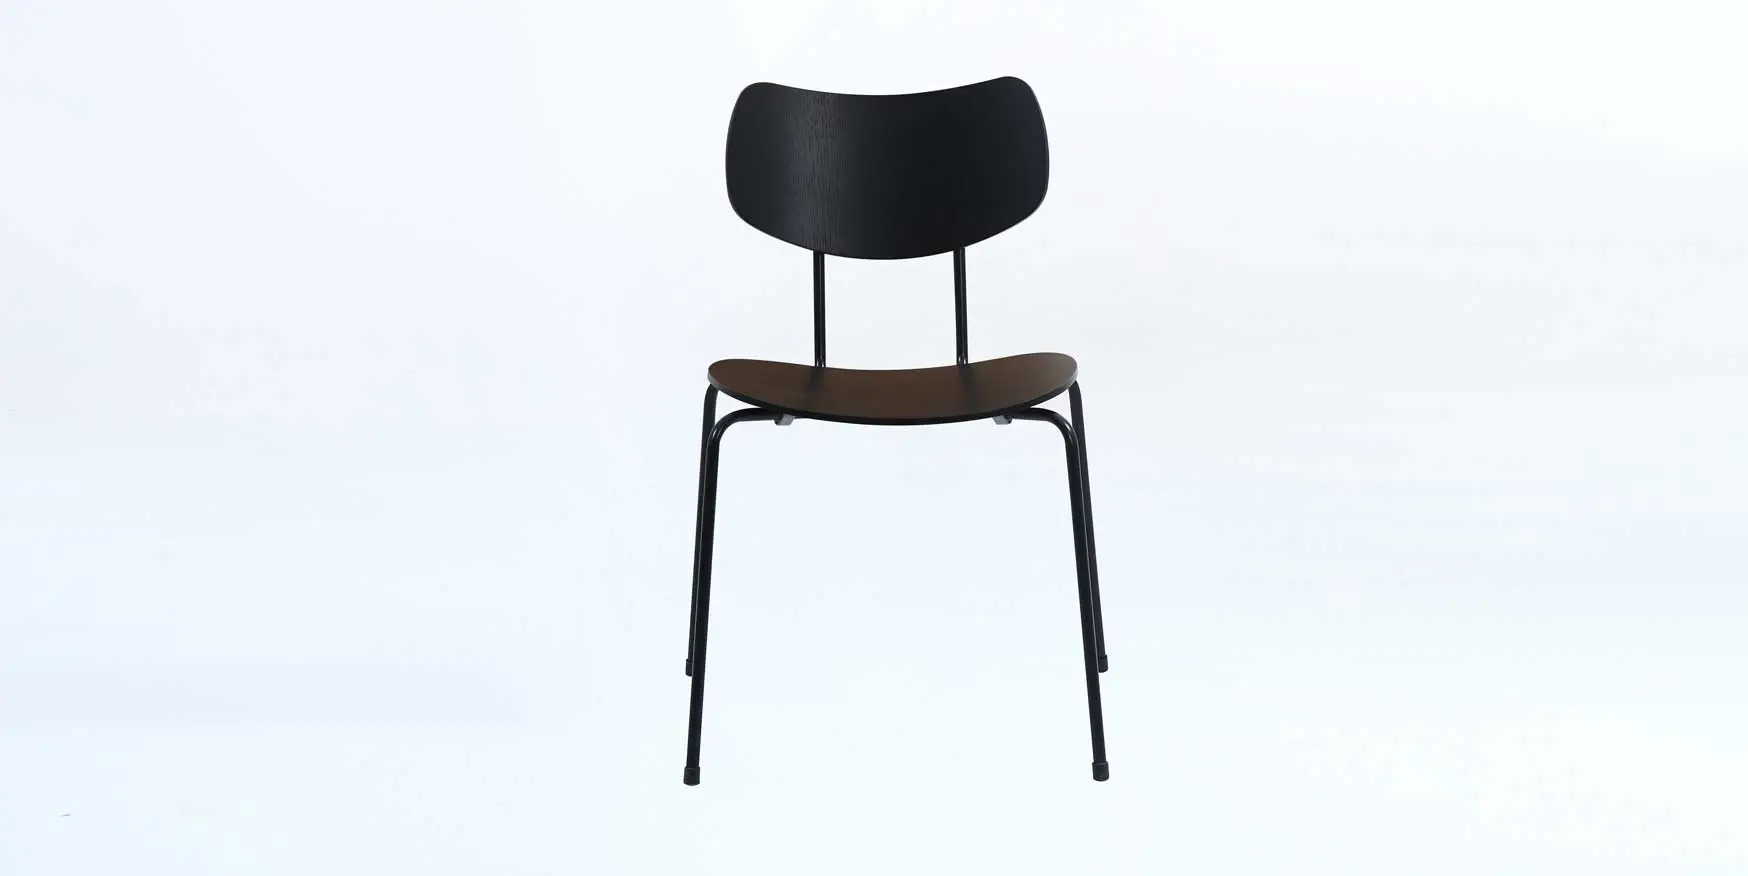 tufted dining chair